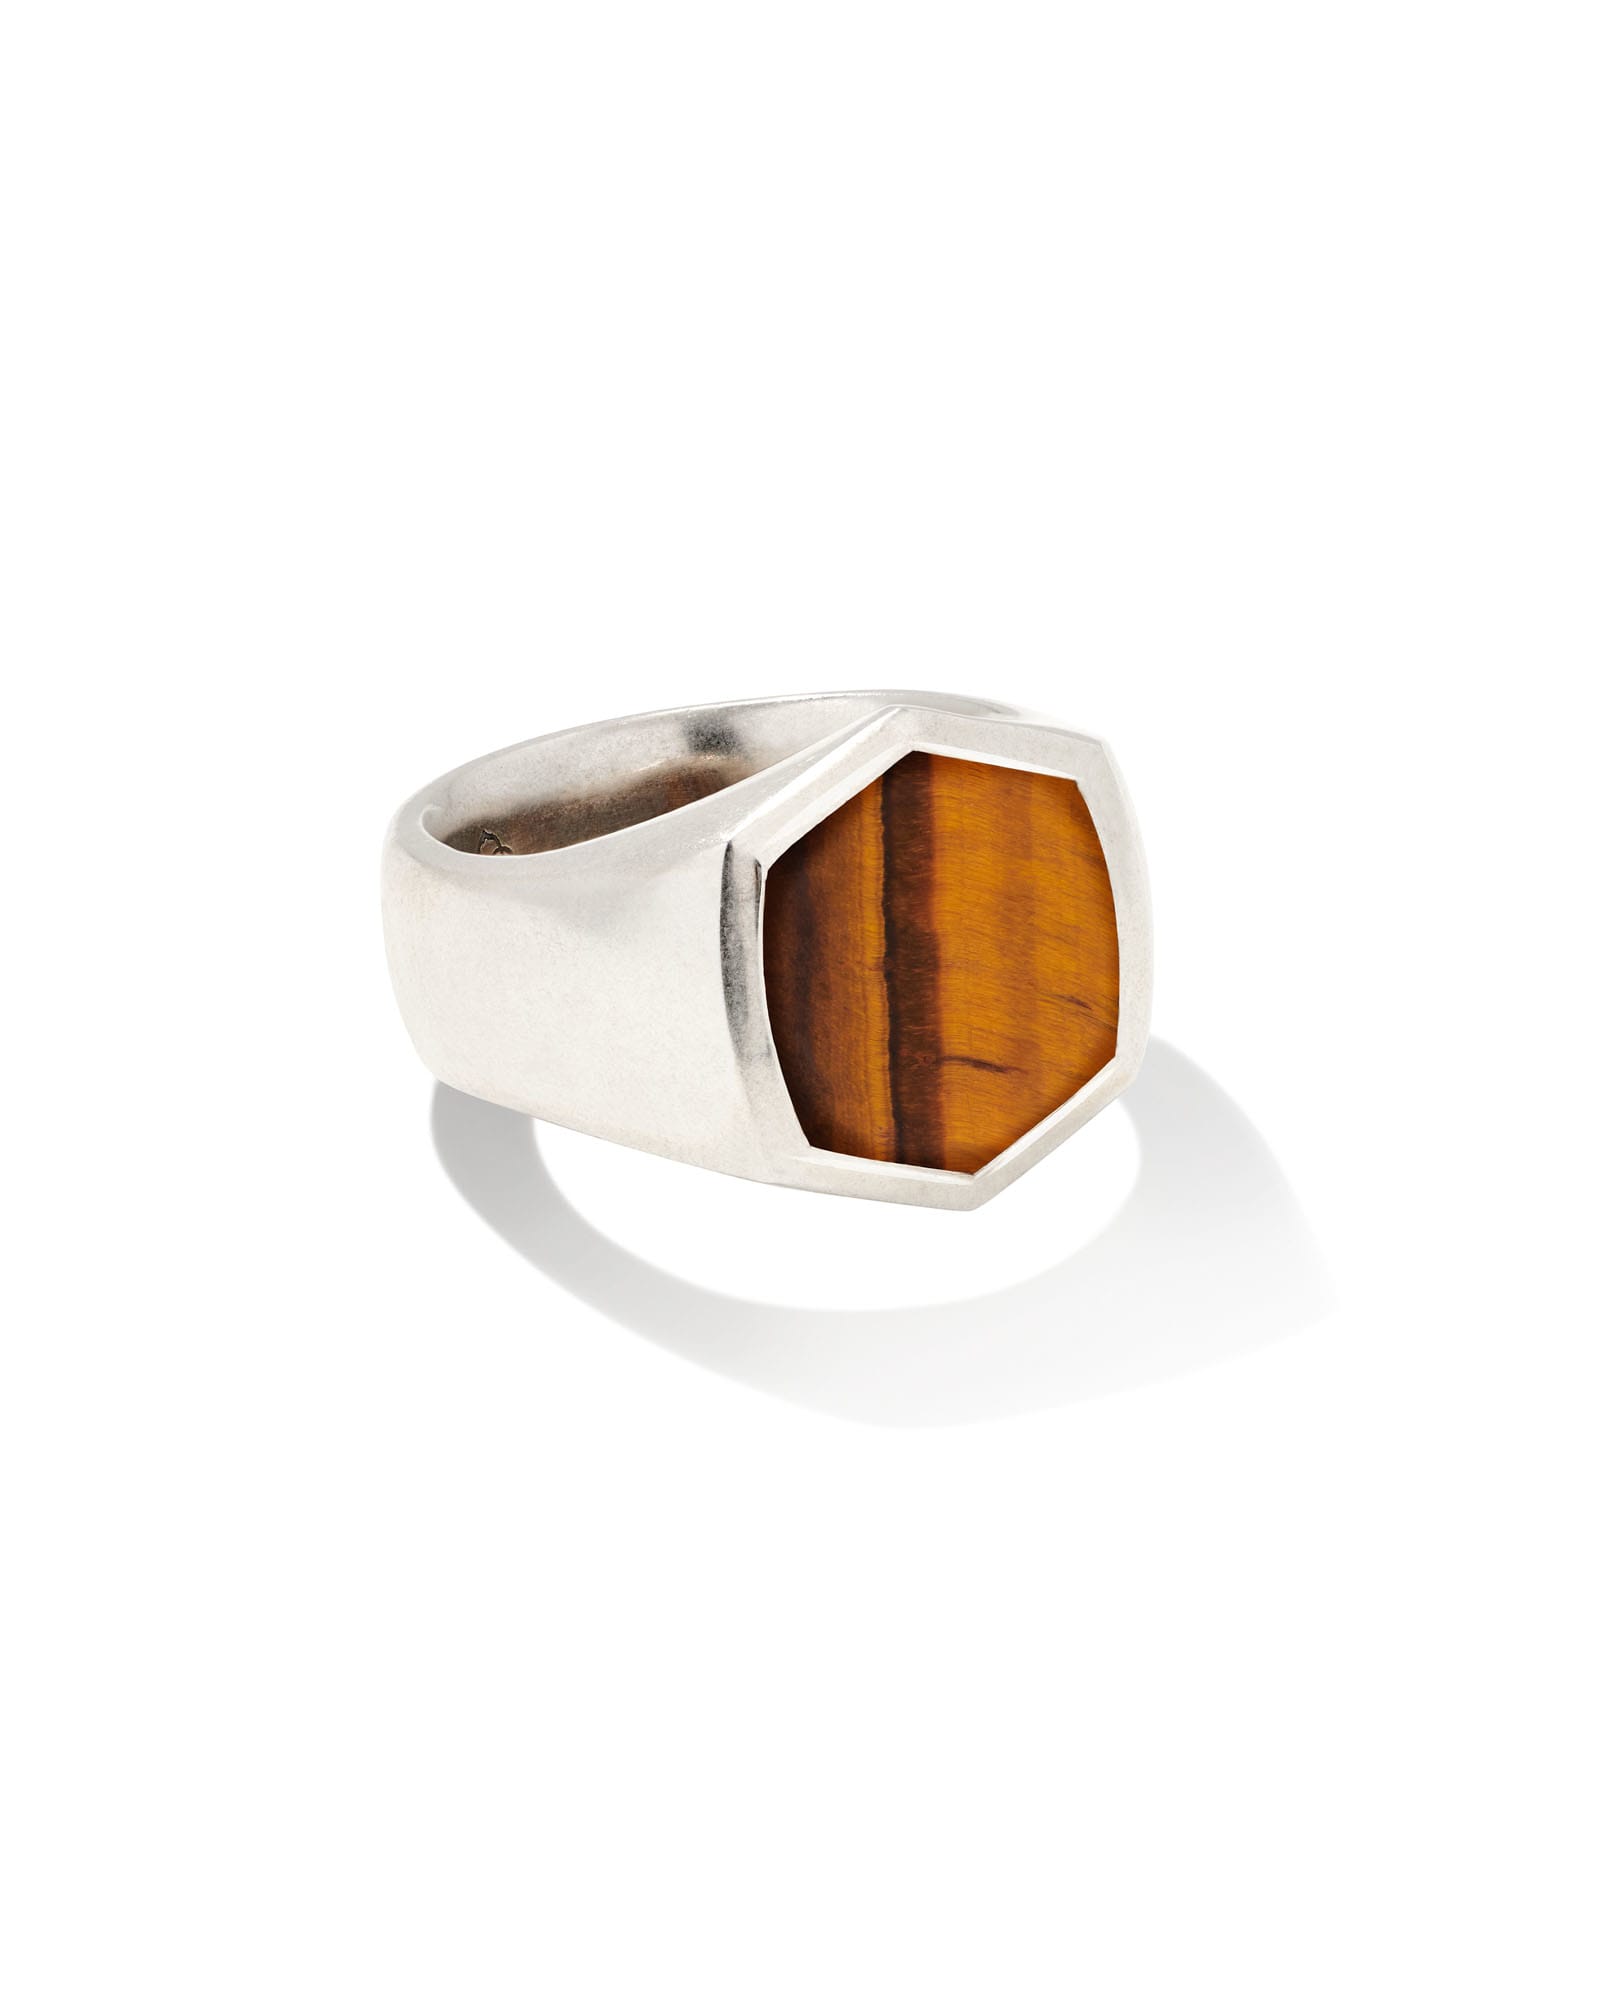 Kendra Scott Hicks Oxidized Sterling Silver Stone Signet Ring in Brown Tiger's Eye   Tigers Eye   Size 8